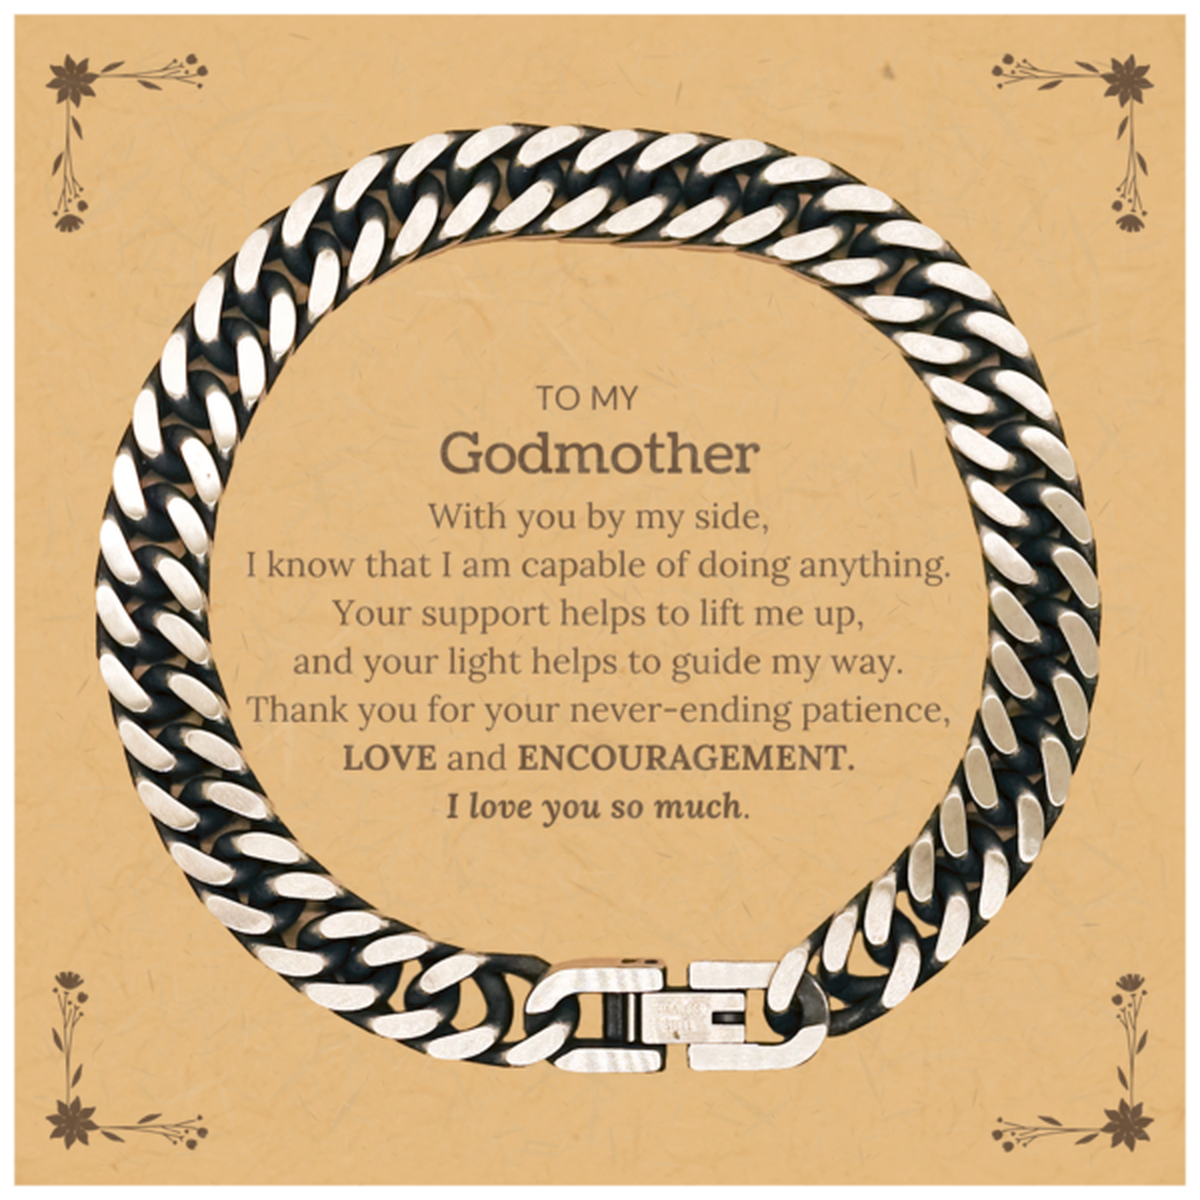 Appreciation Godmother Cuban Link Chain Bracelet Gifts, To My Godmother Birthday Christmas Wedding Keepsake Gifts for Godmother With you by my side, I know that I am capable of doing anything. I love you so much